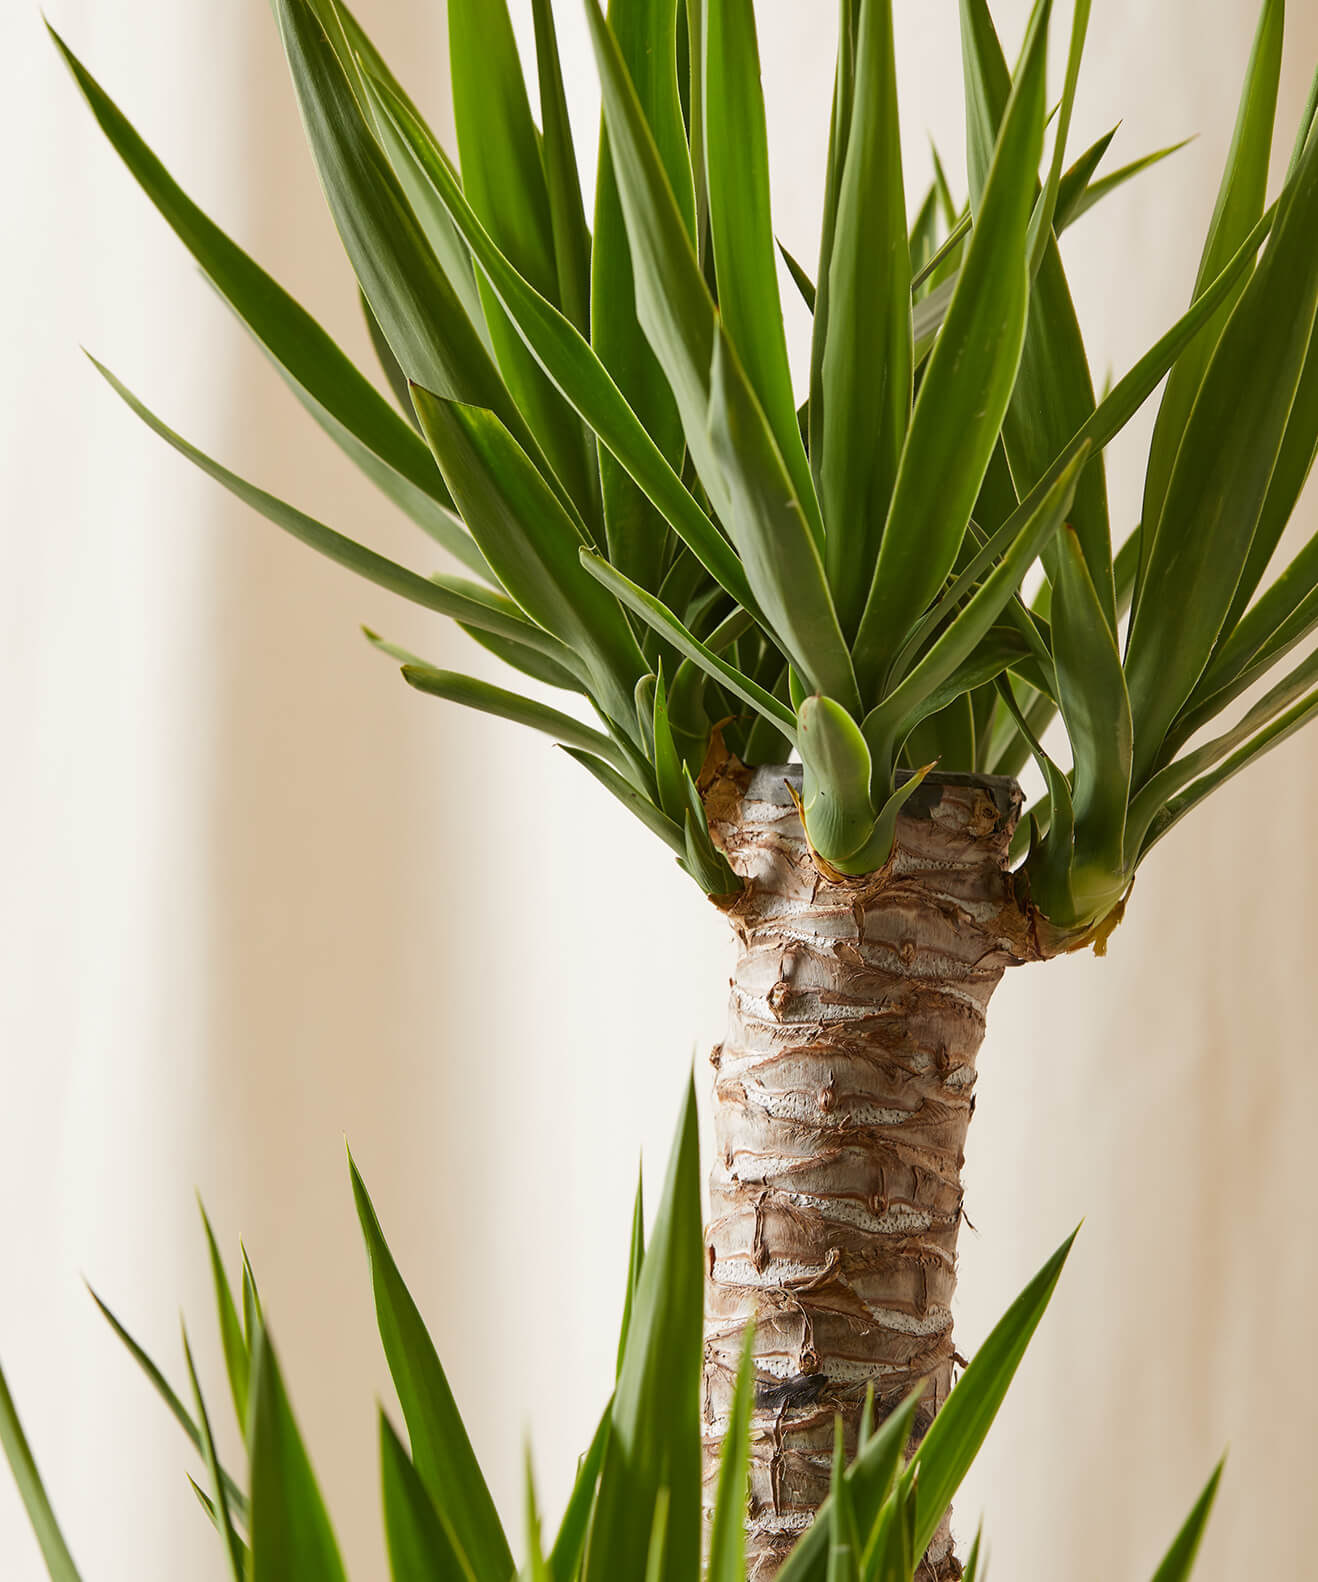 How to care for yucca cane plant outdoors